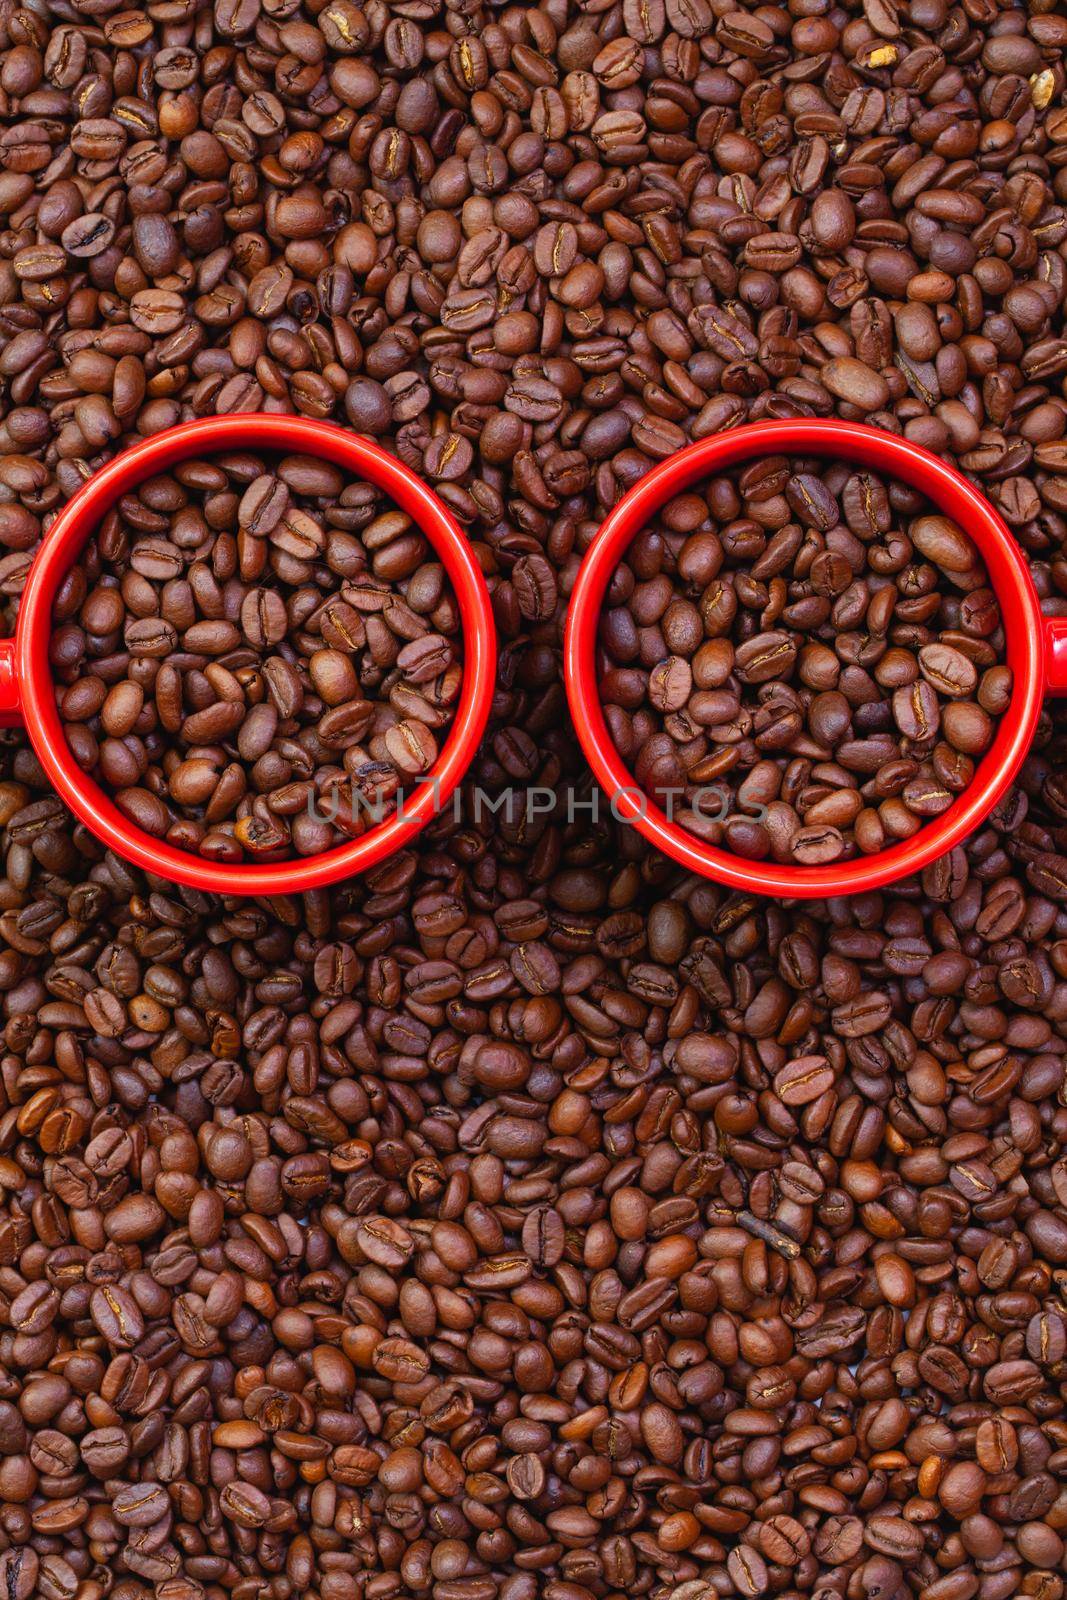 Two red cups full of coffee beans. Fair Trade. Commodity trade. Fresh coffee beans.